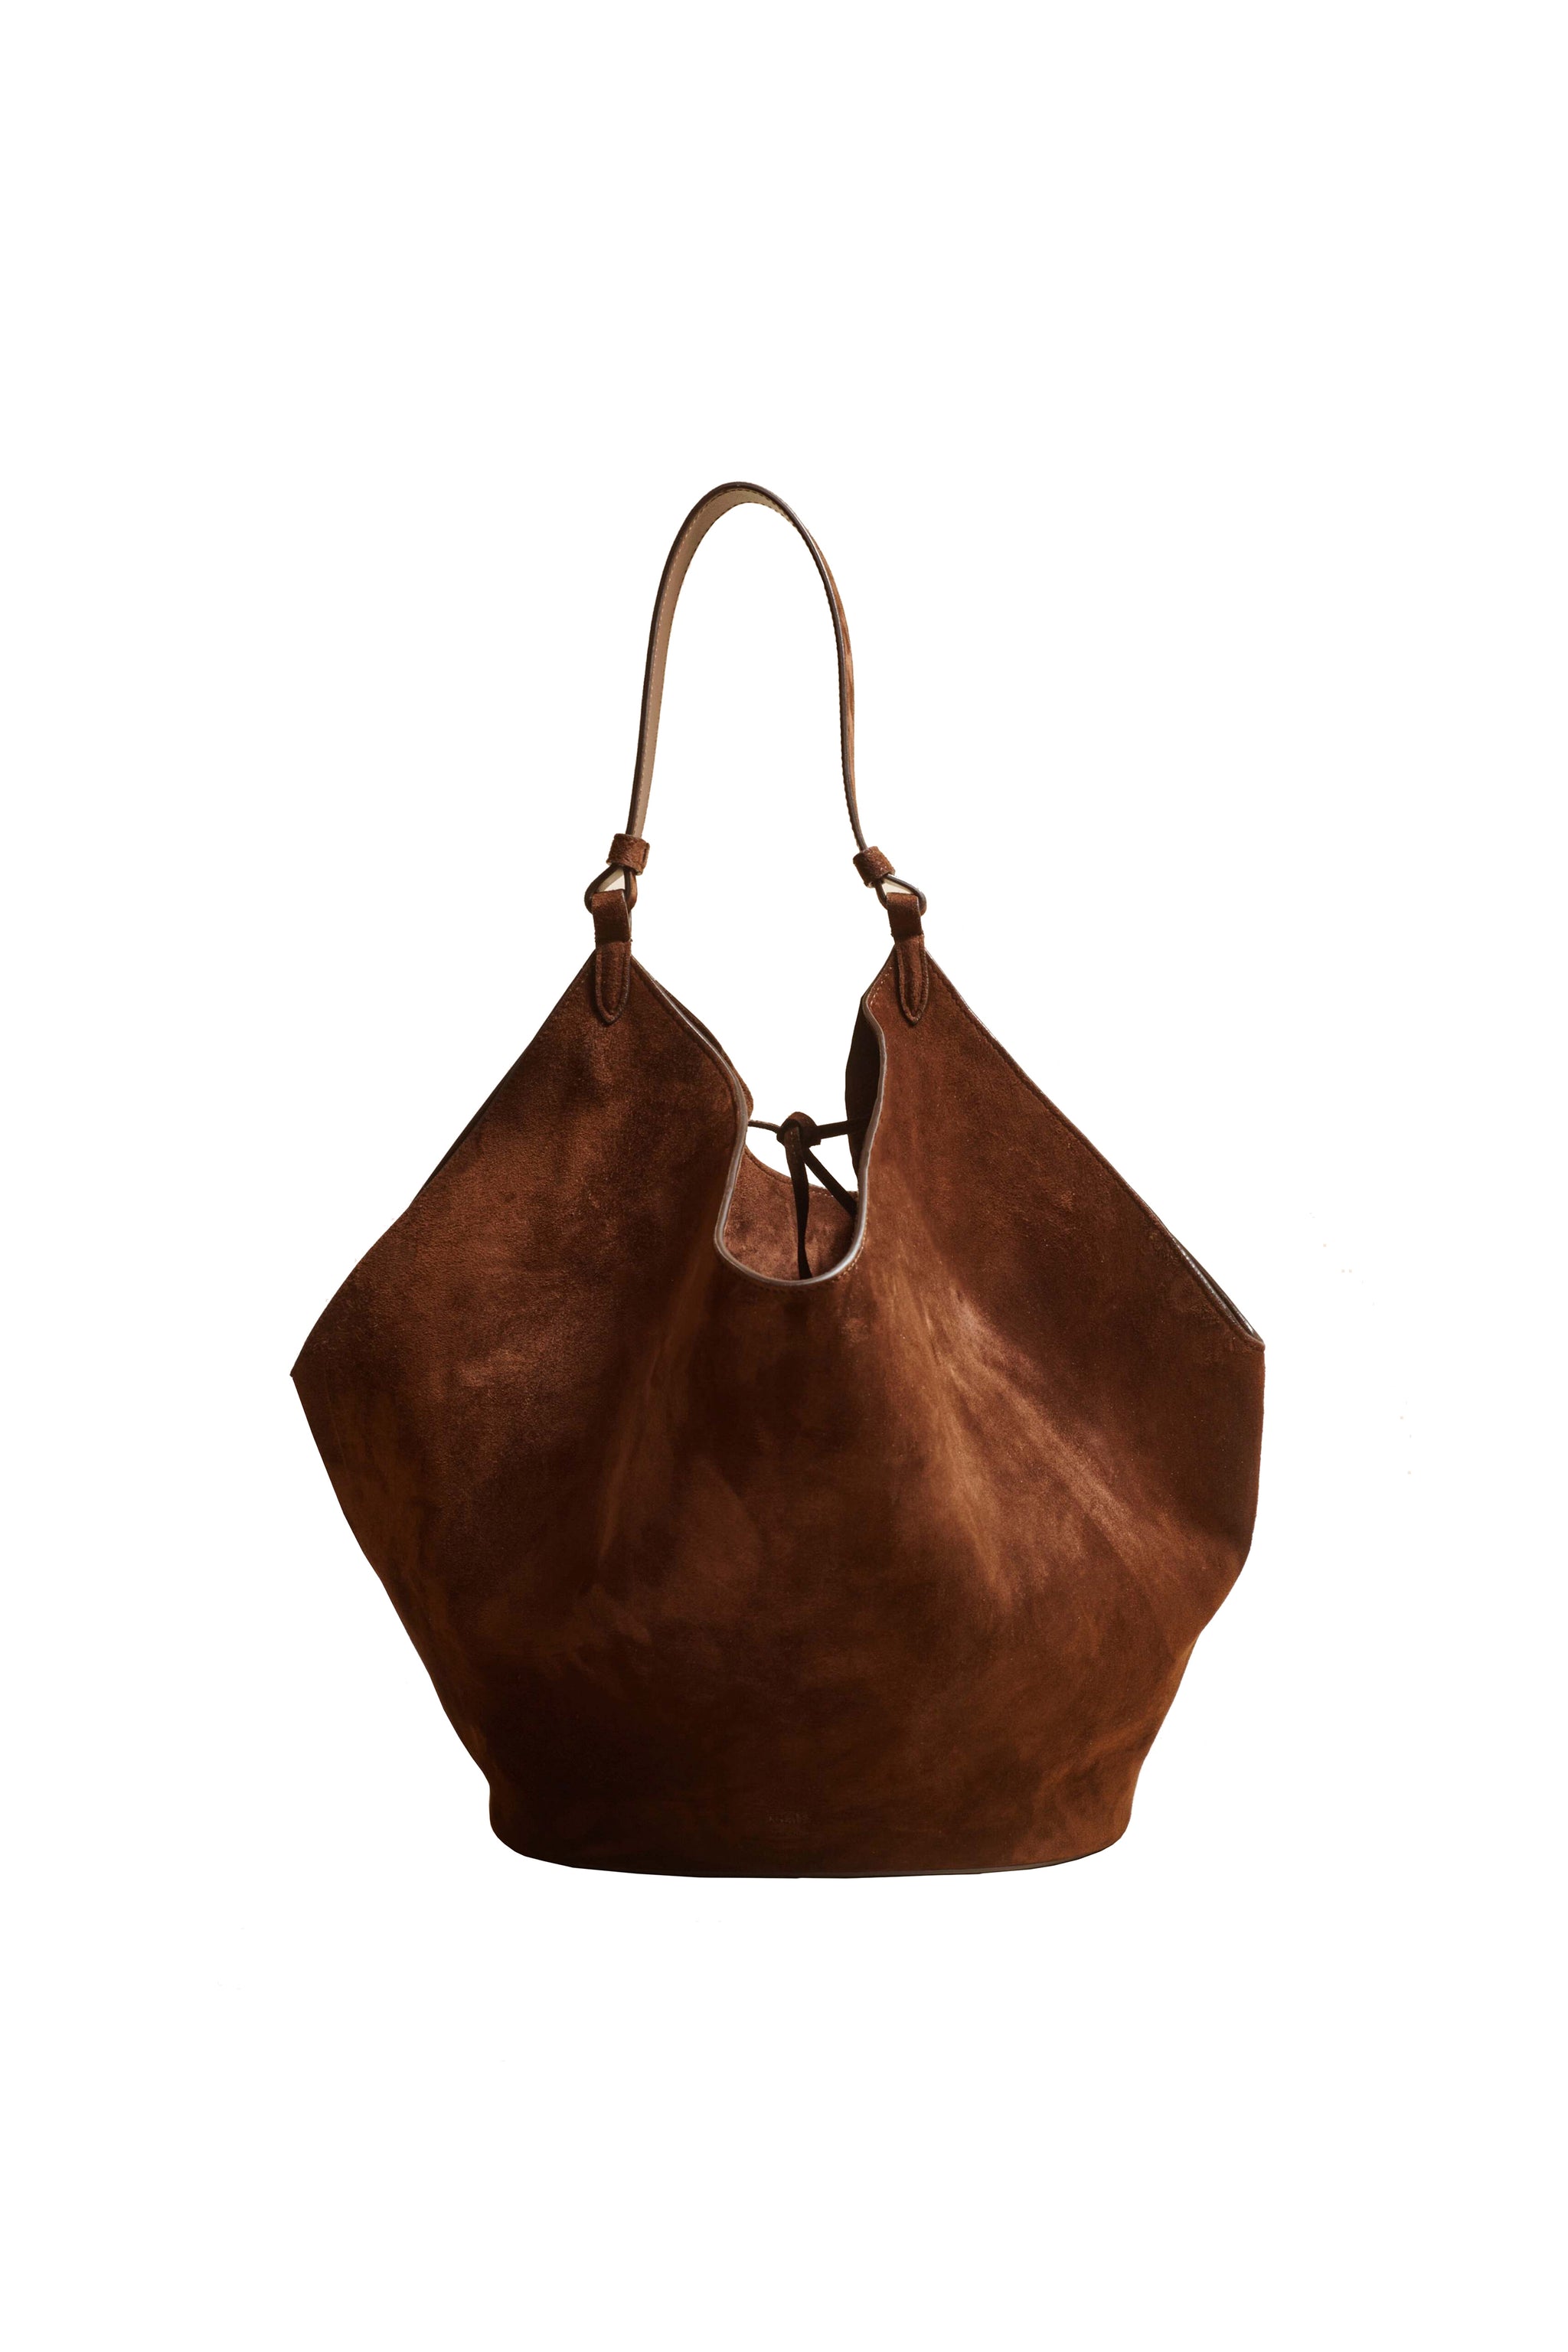 The August Hobo in Coffee Suede– KHAITE